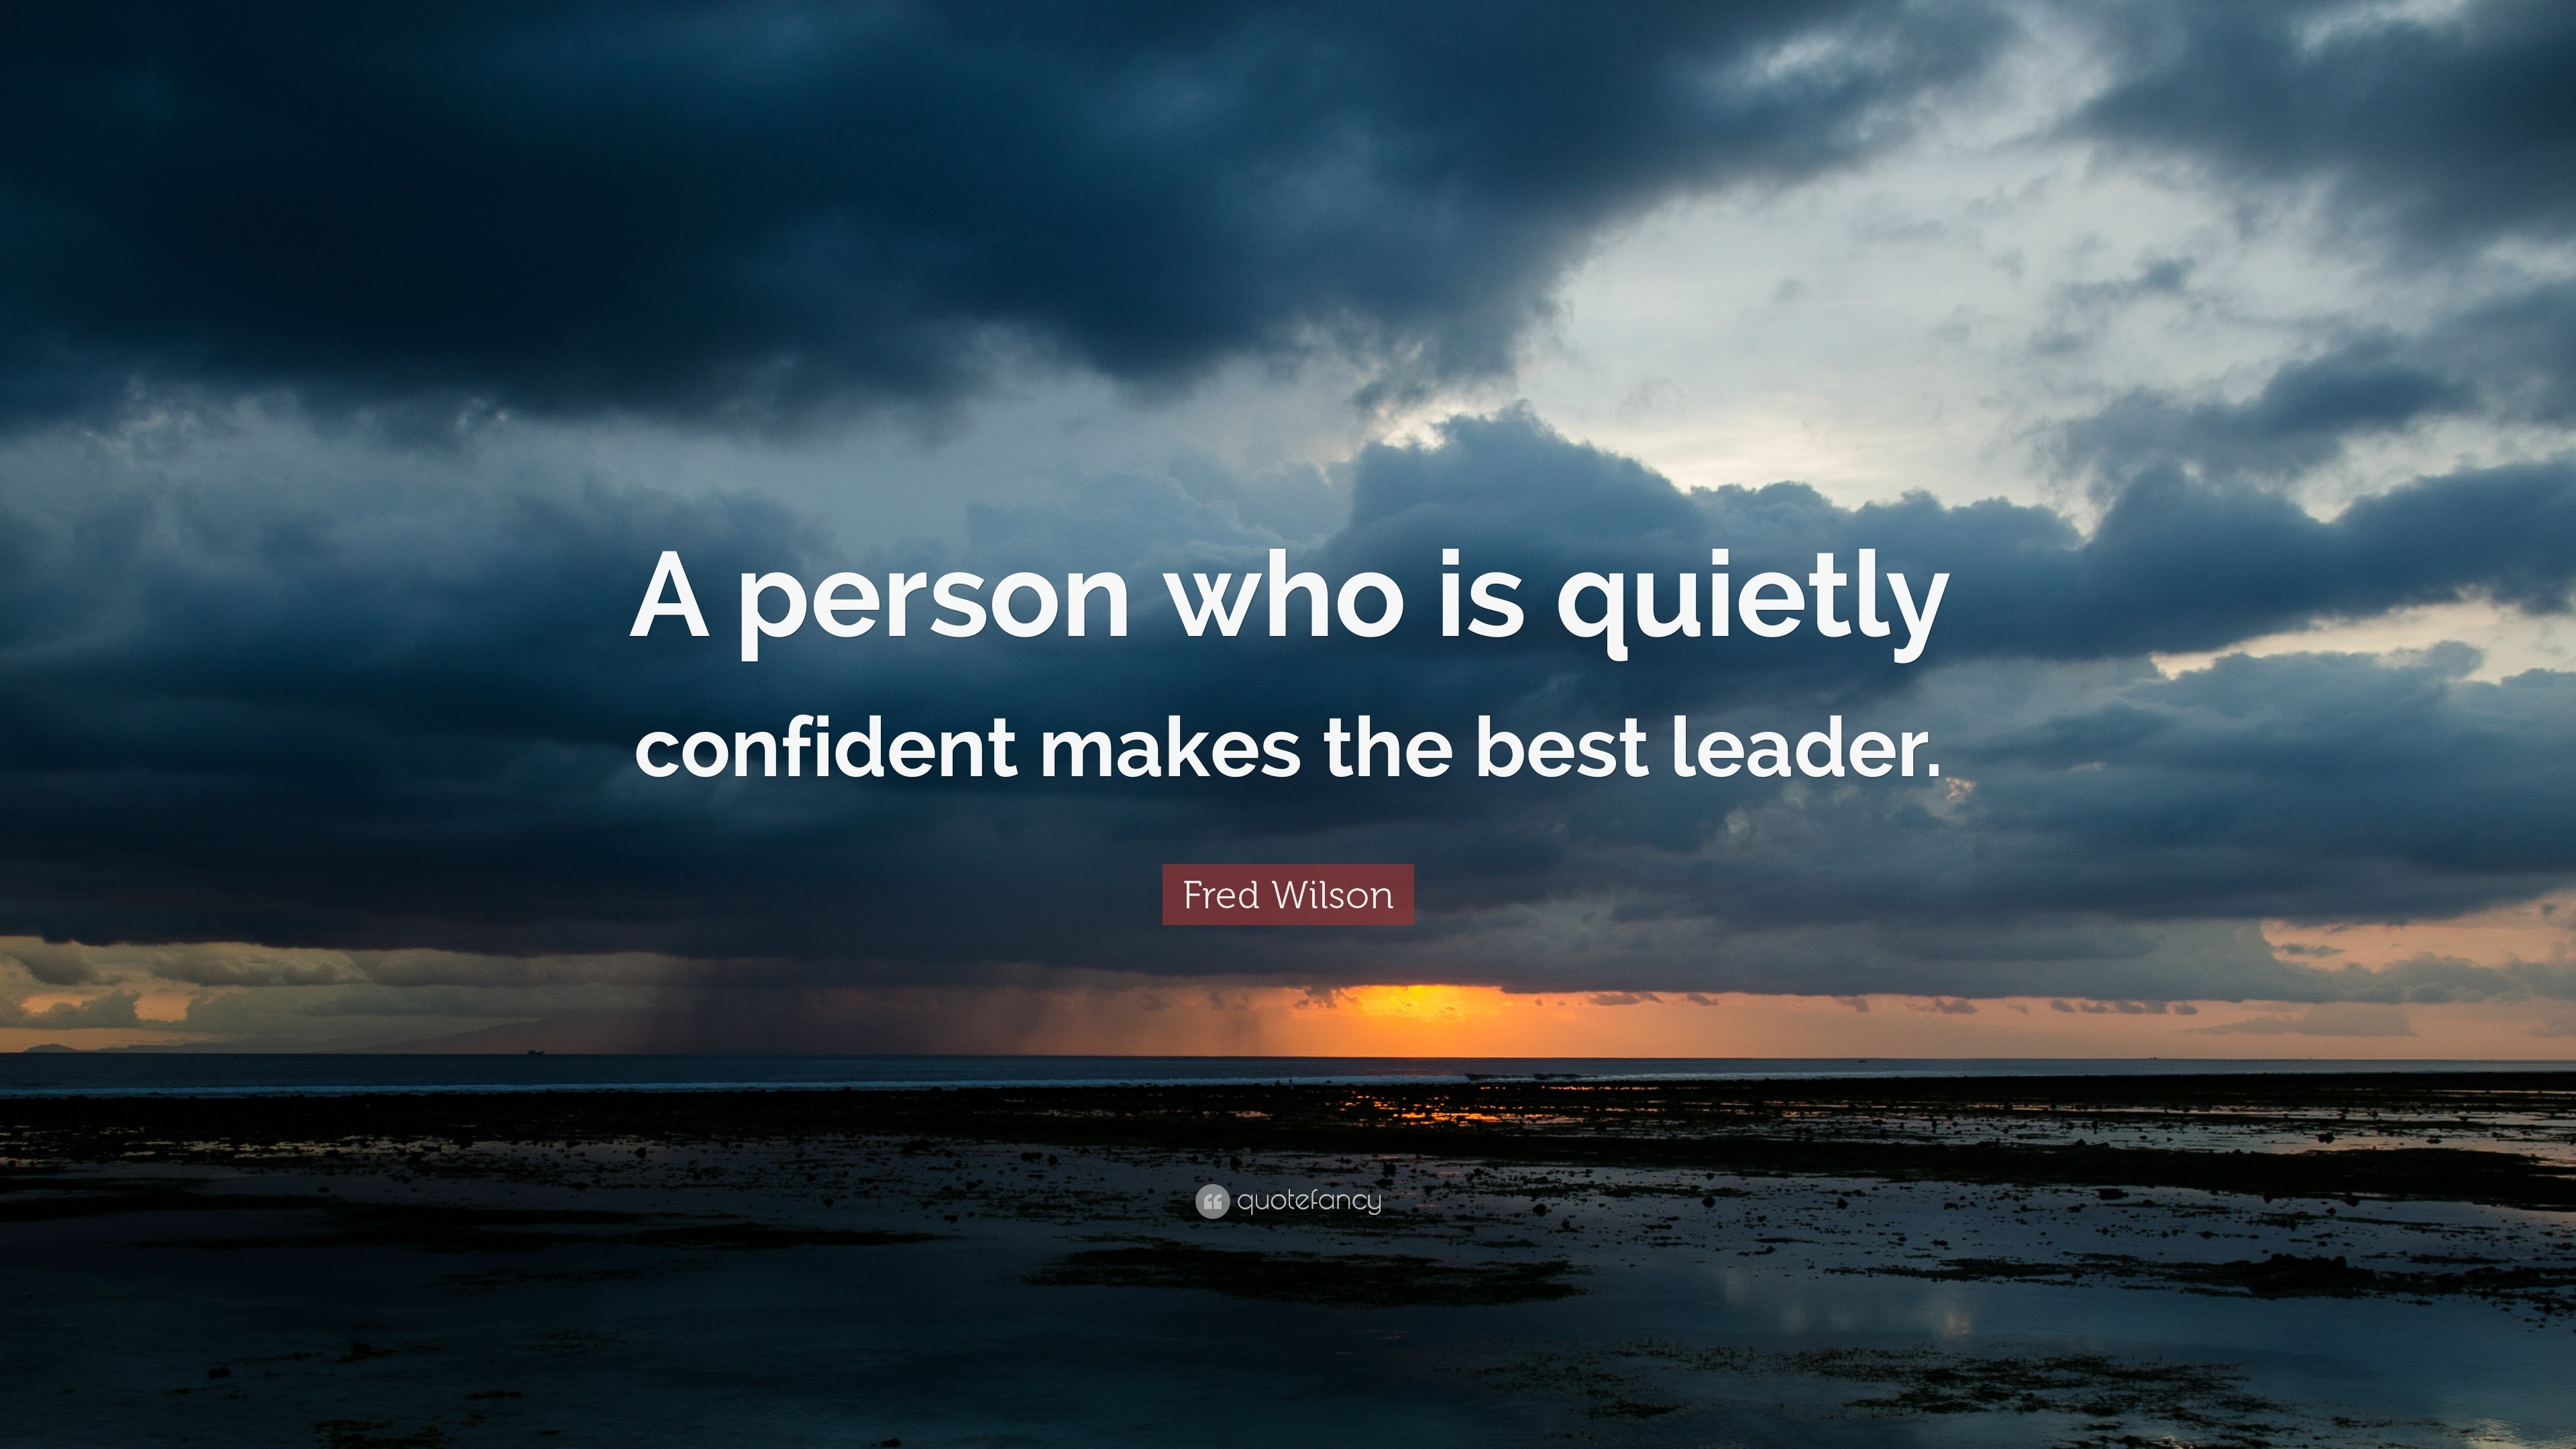 3840x2160 Fred Wilson Quote: “A person who is quietly confident makes the best leader.